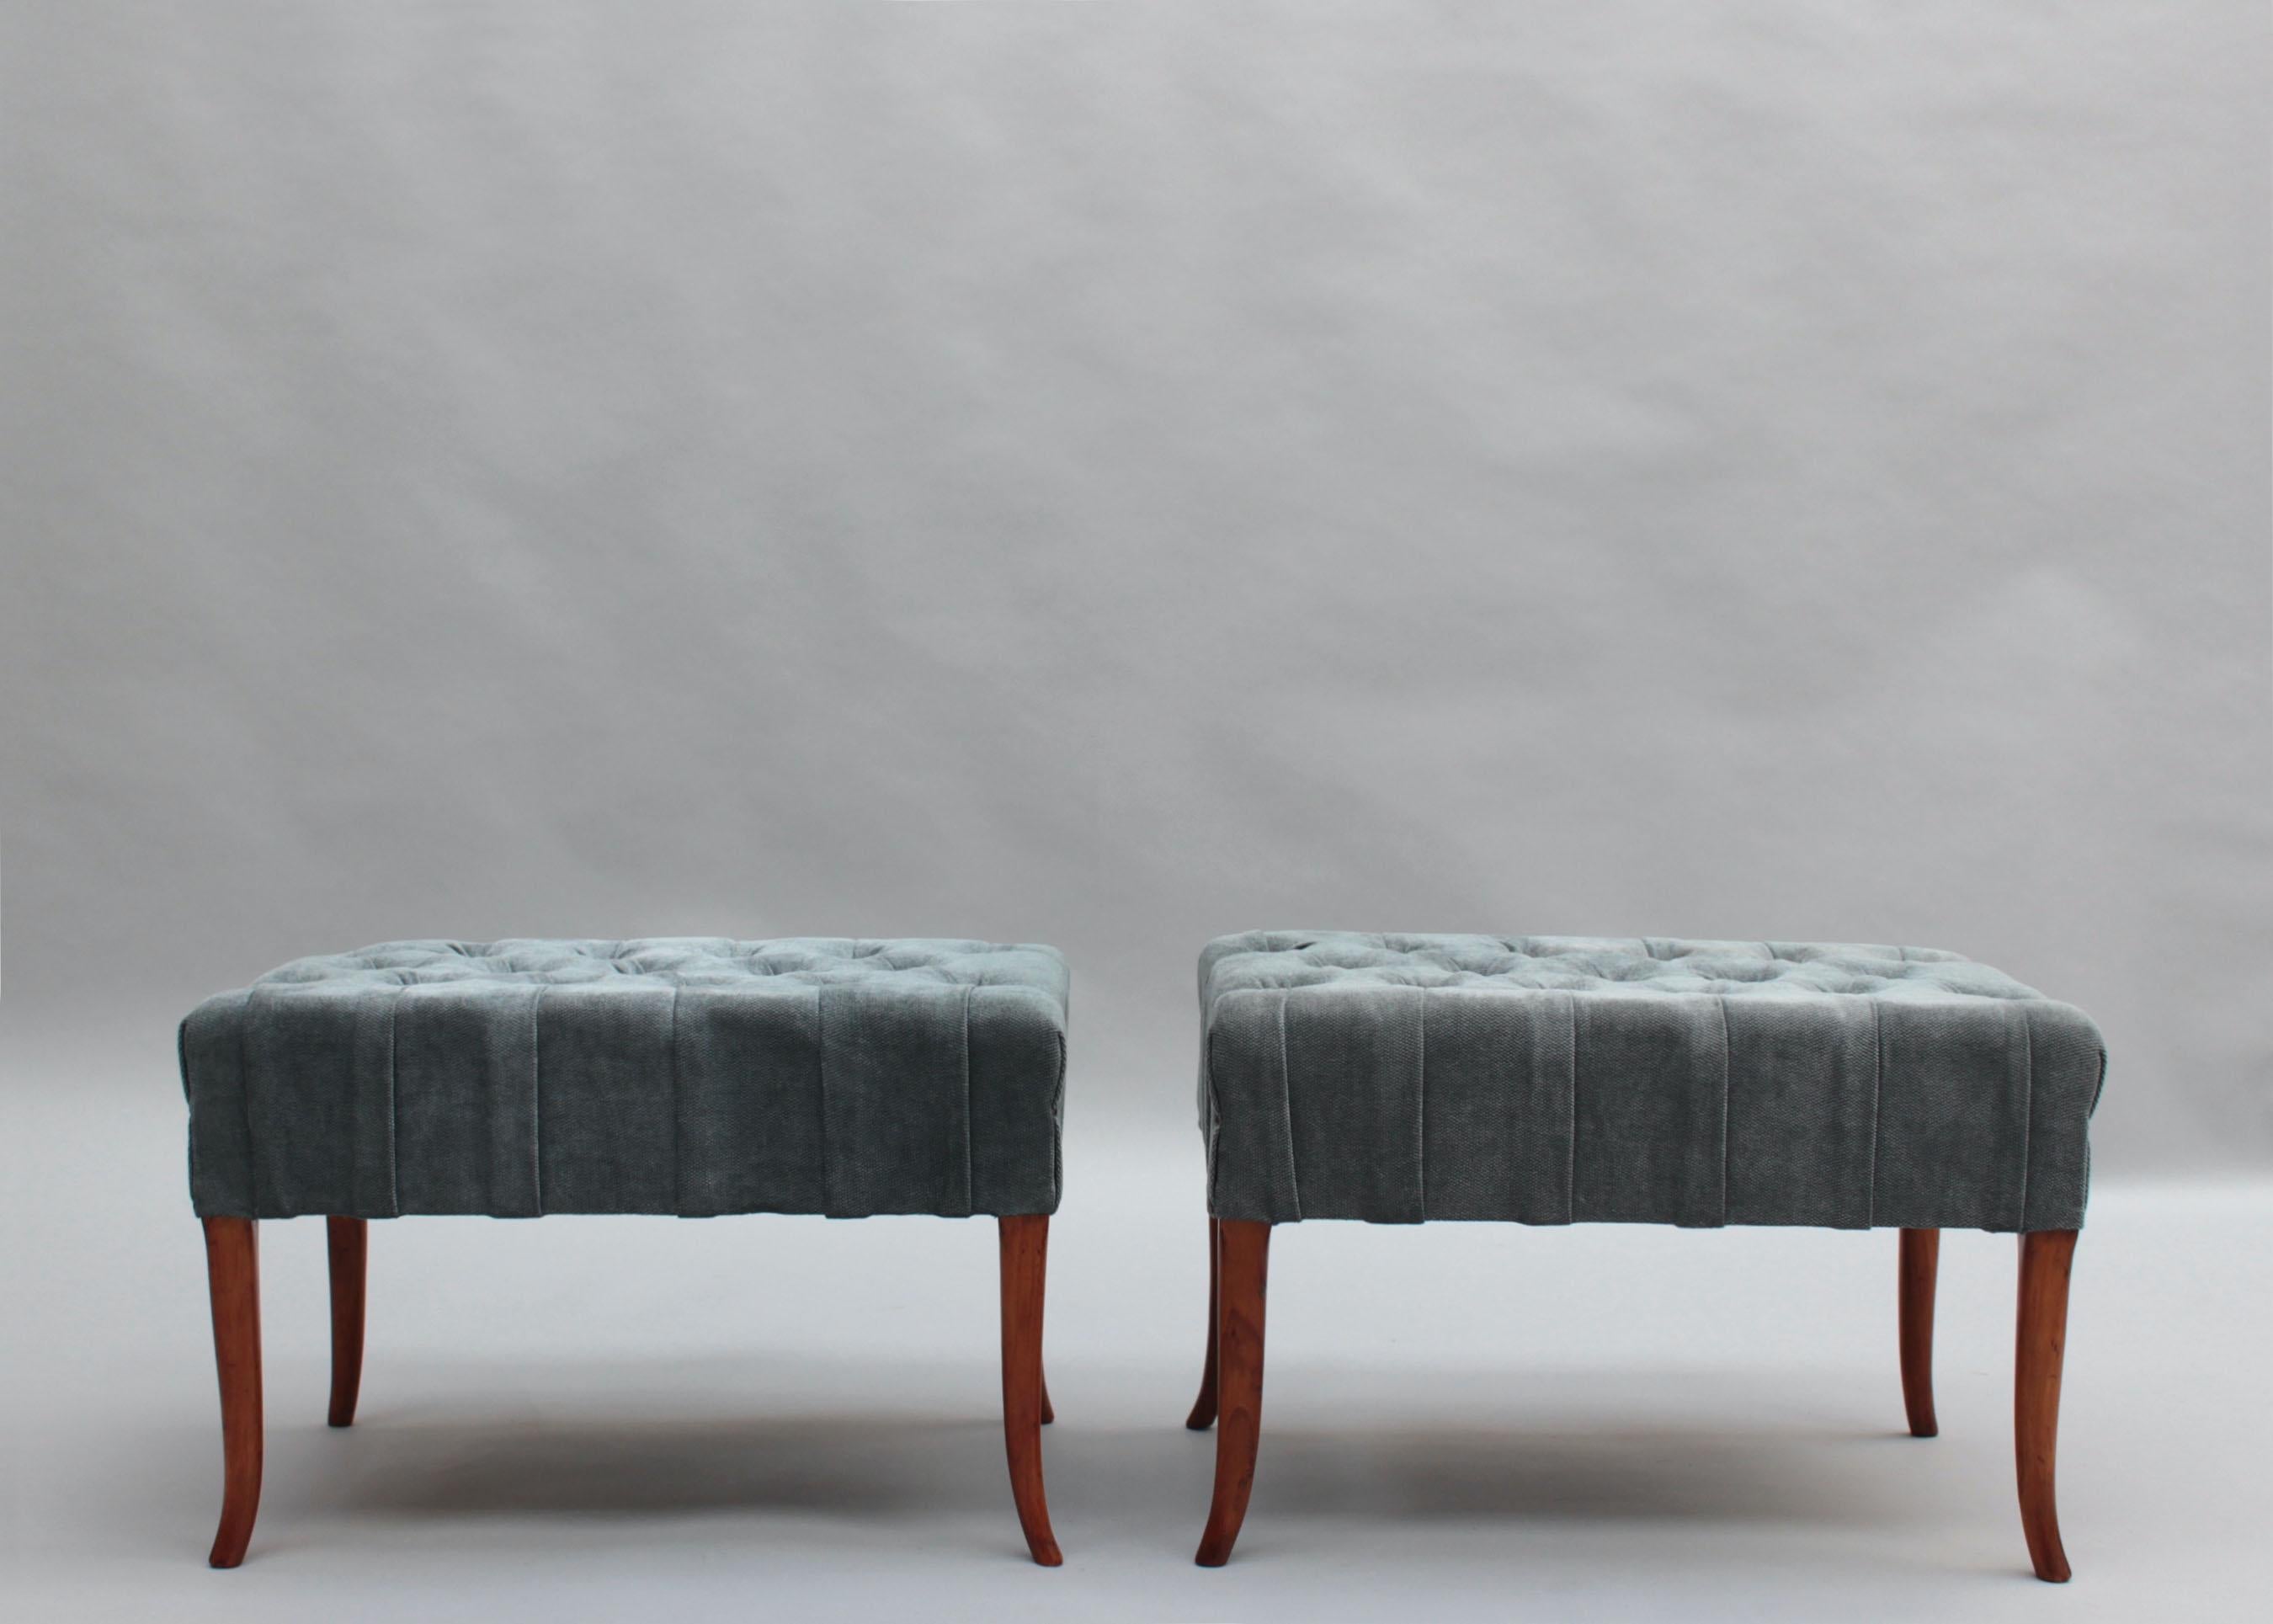 A pair of 1960s Italian buttoned chesterfield benches with wooden legs.